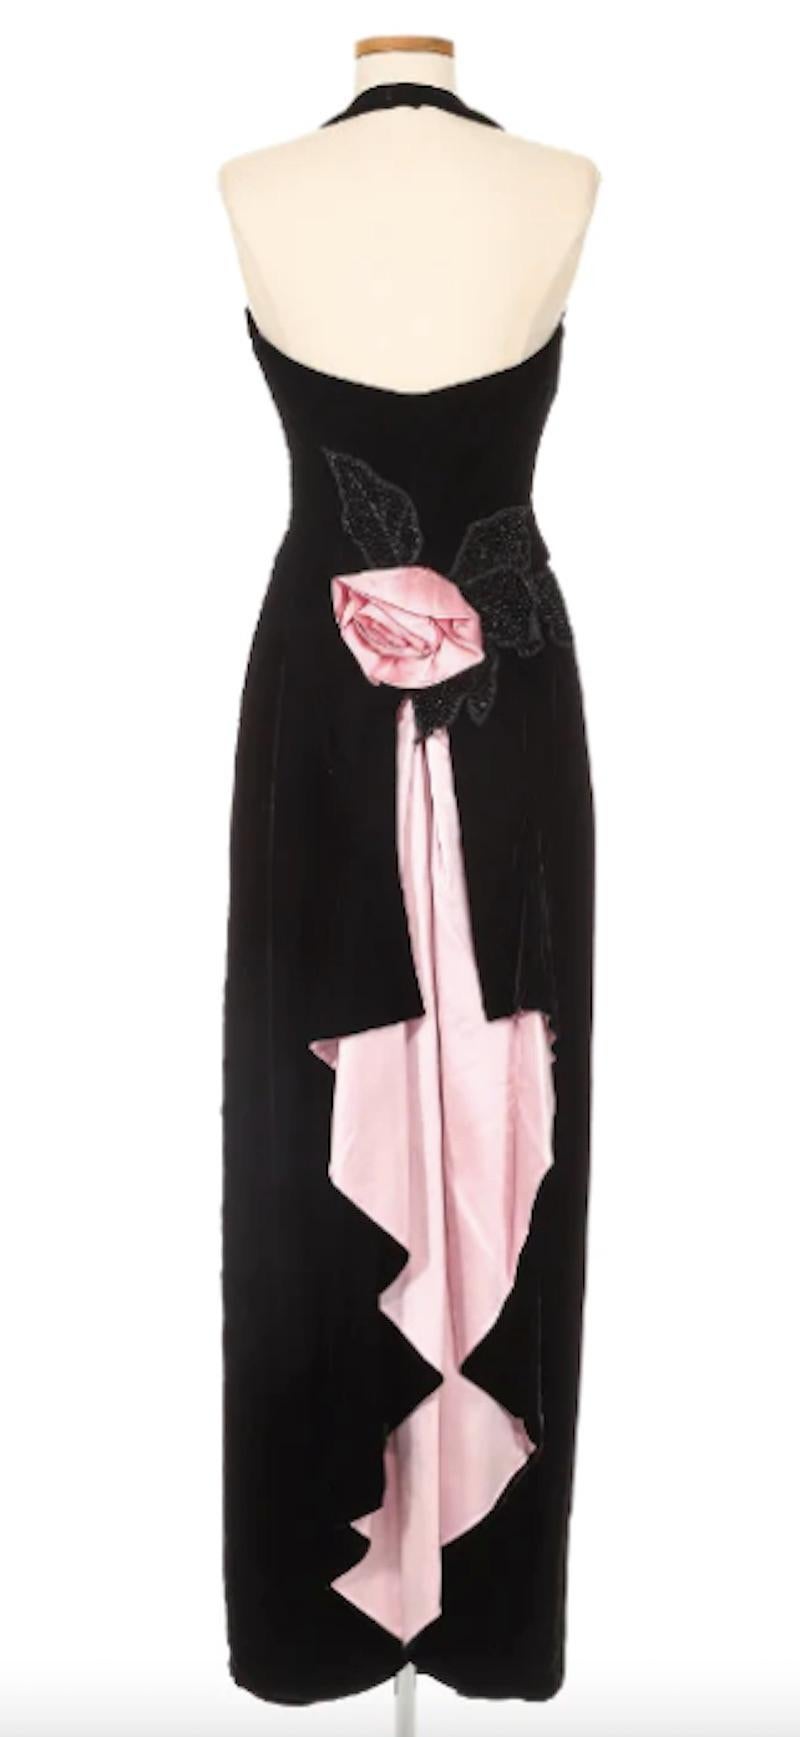 Paul-Louis Orrier Black Velvet Gown with Pink Silk Flower. Couture designer Paul-Louis Orrier, who became widely recognized in the 1970s, was celebrated for dressing the boldest and most audacious figures of his time, including Liza Minnelli. This